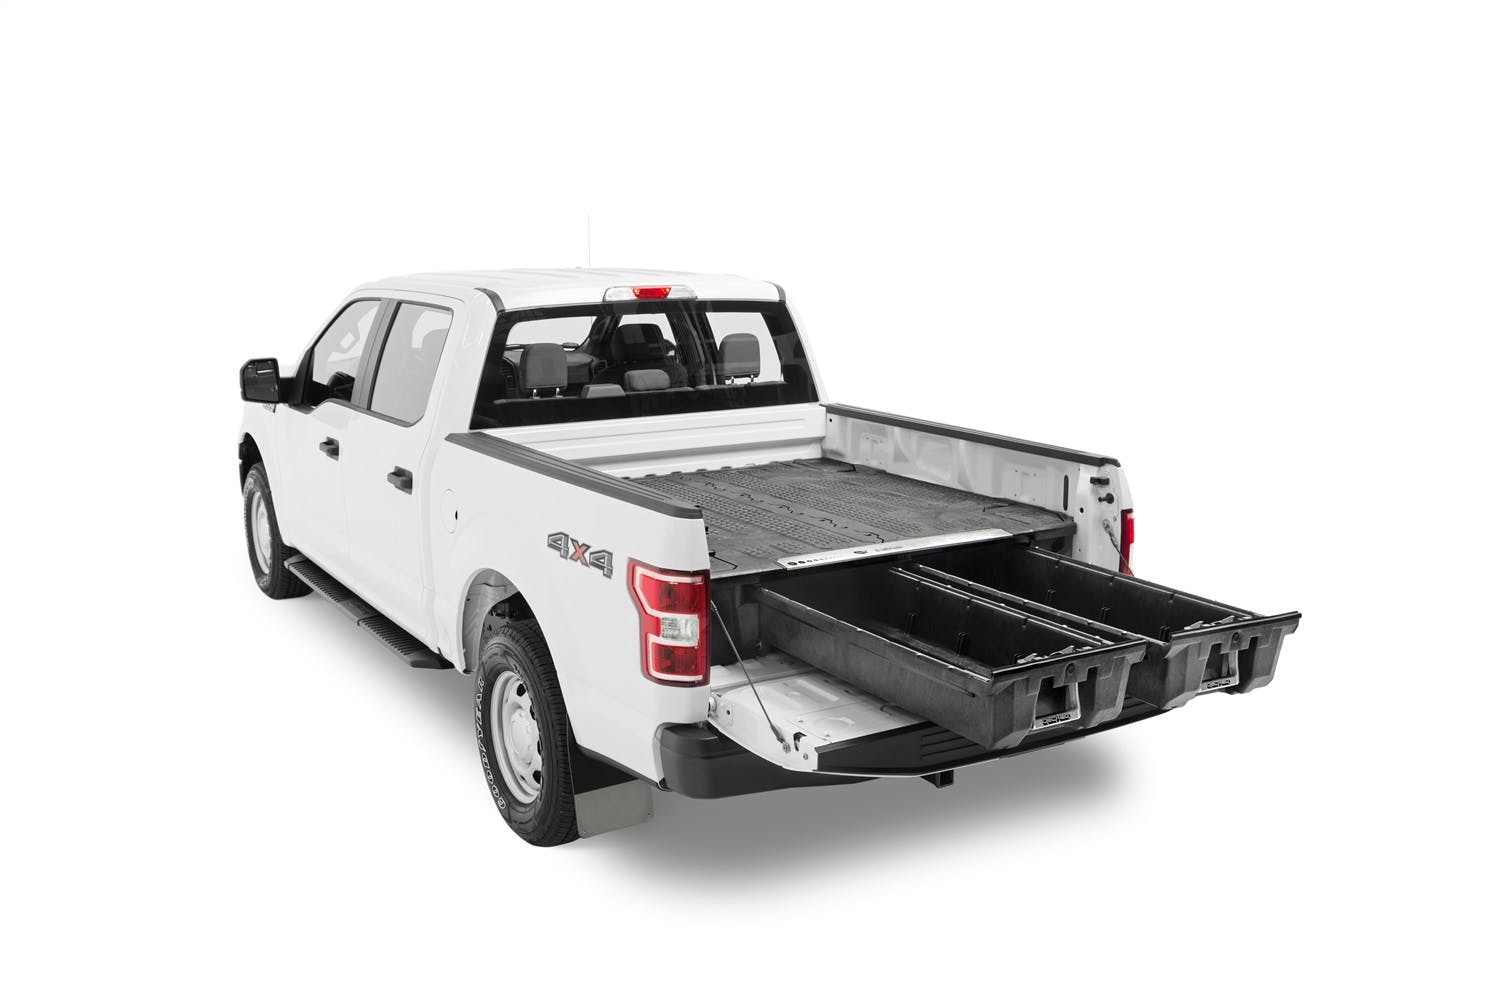 DECKED DF1 75.25 Two Drawer Storage System for A Full Size Pick Up Truck